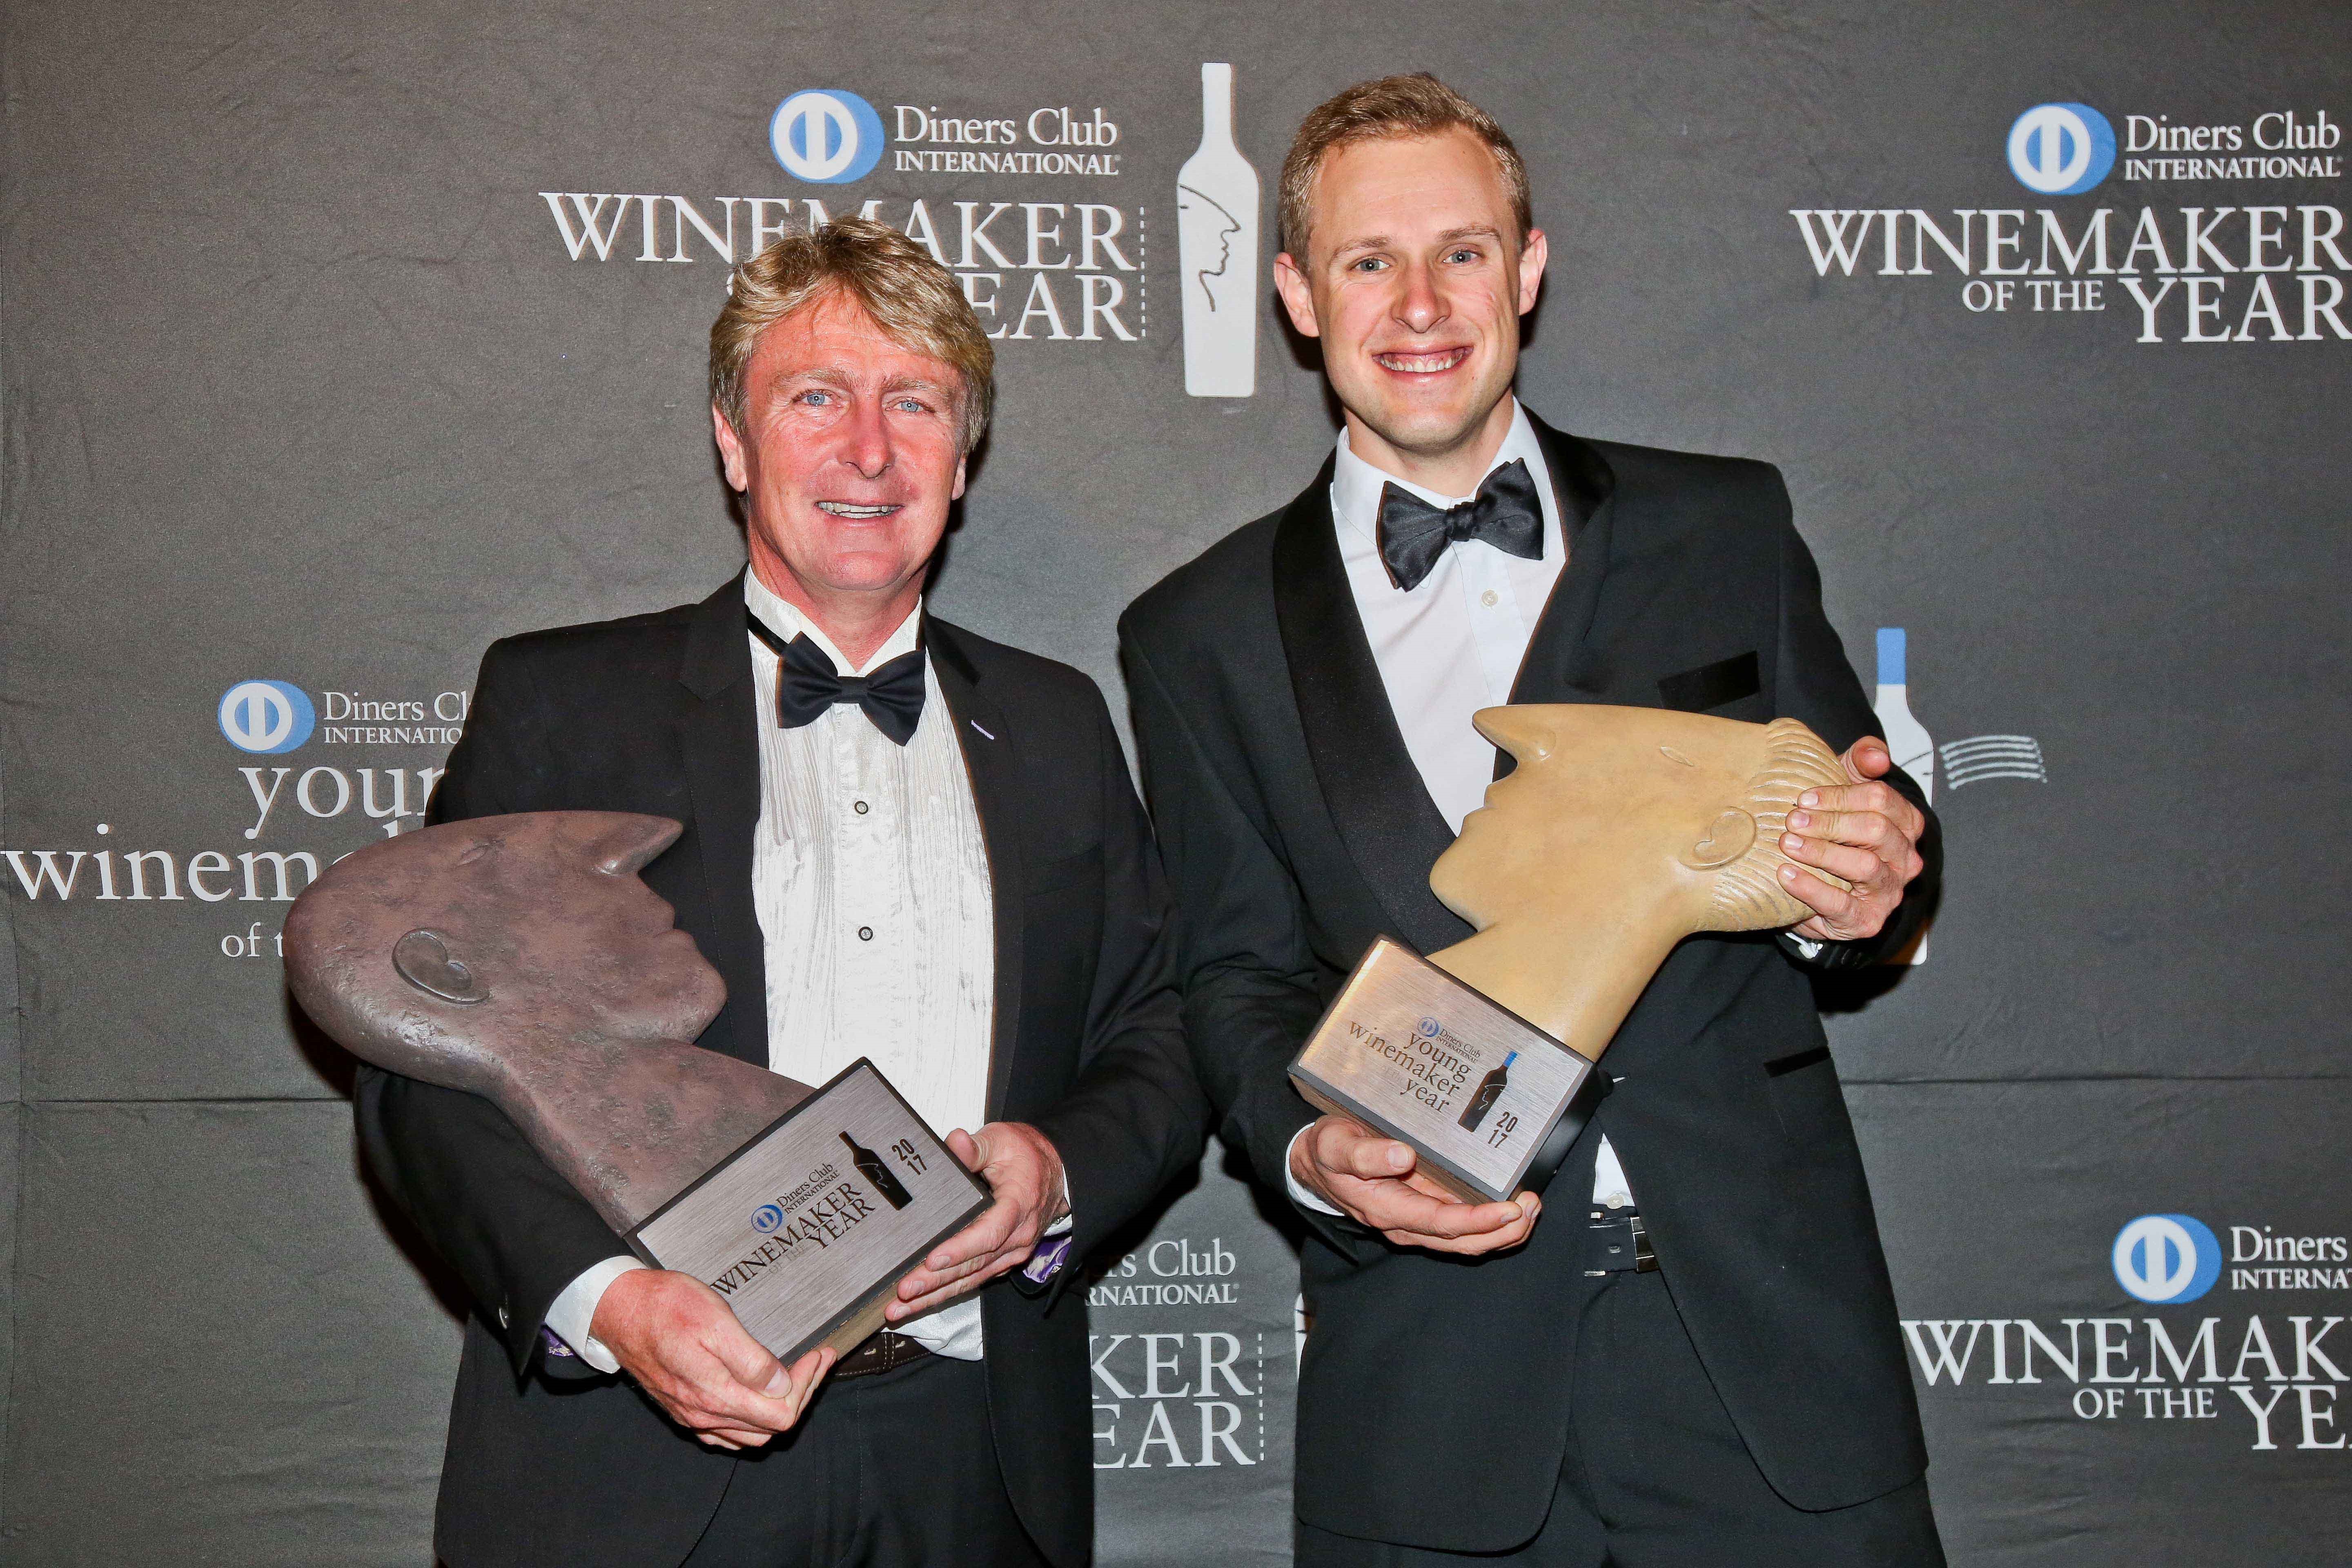 Meet The Winners Of The 2017 #dcwinemaker Awards photo